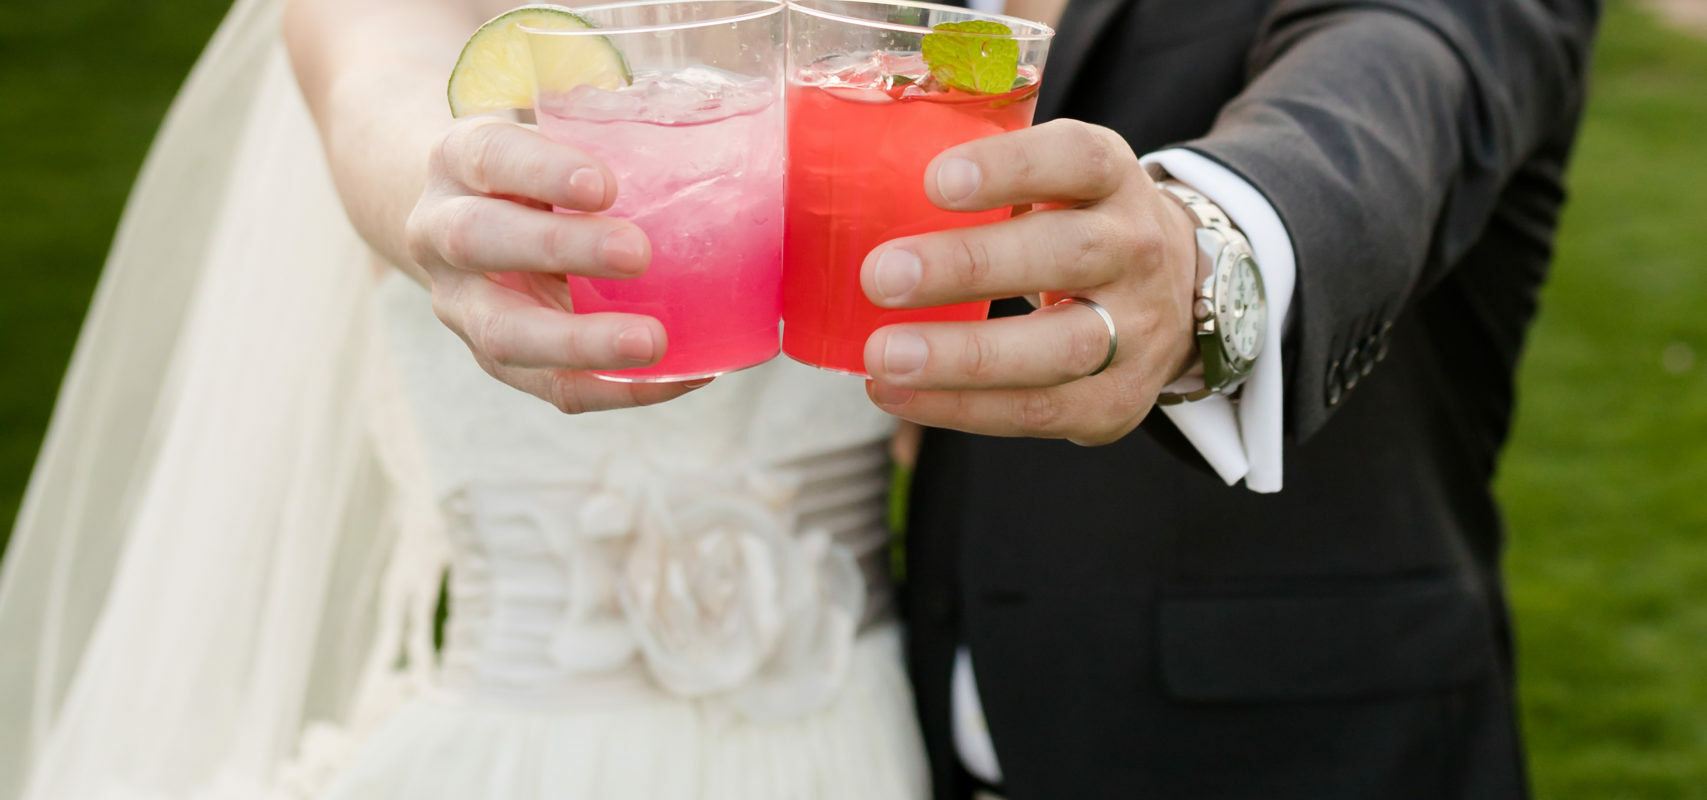 Fun Mocktails for an Alcohol-Free Wedding featured image